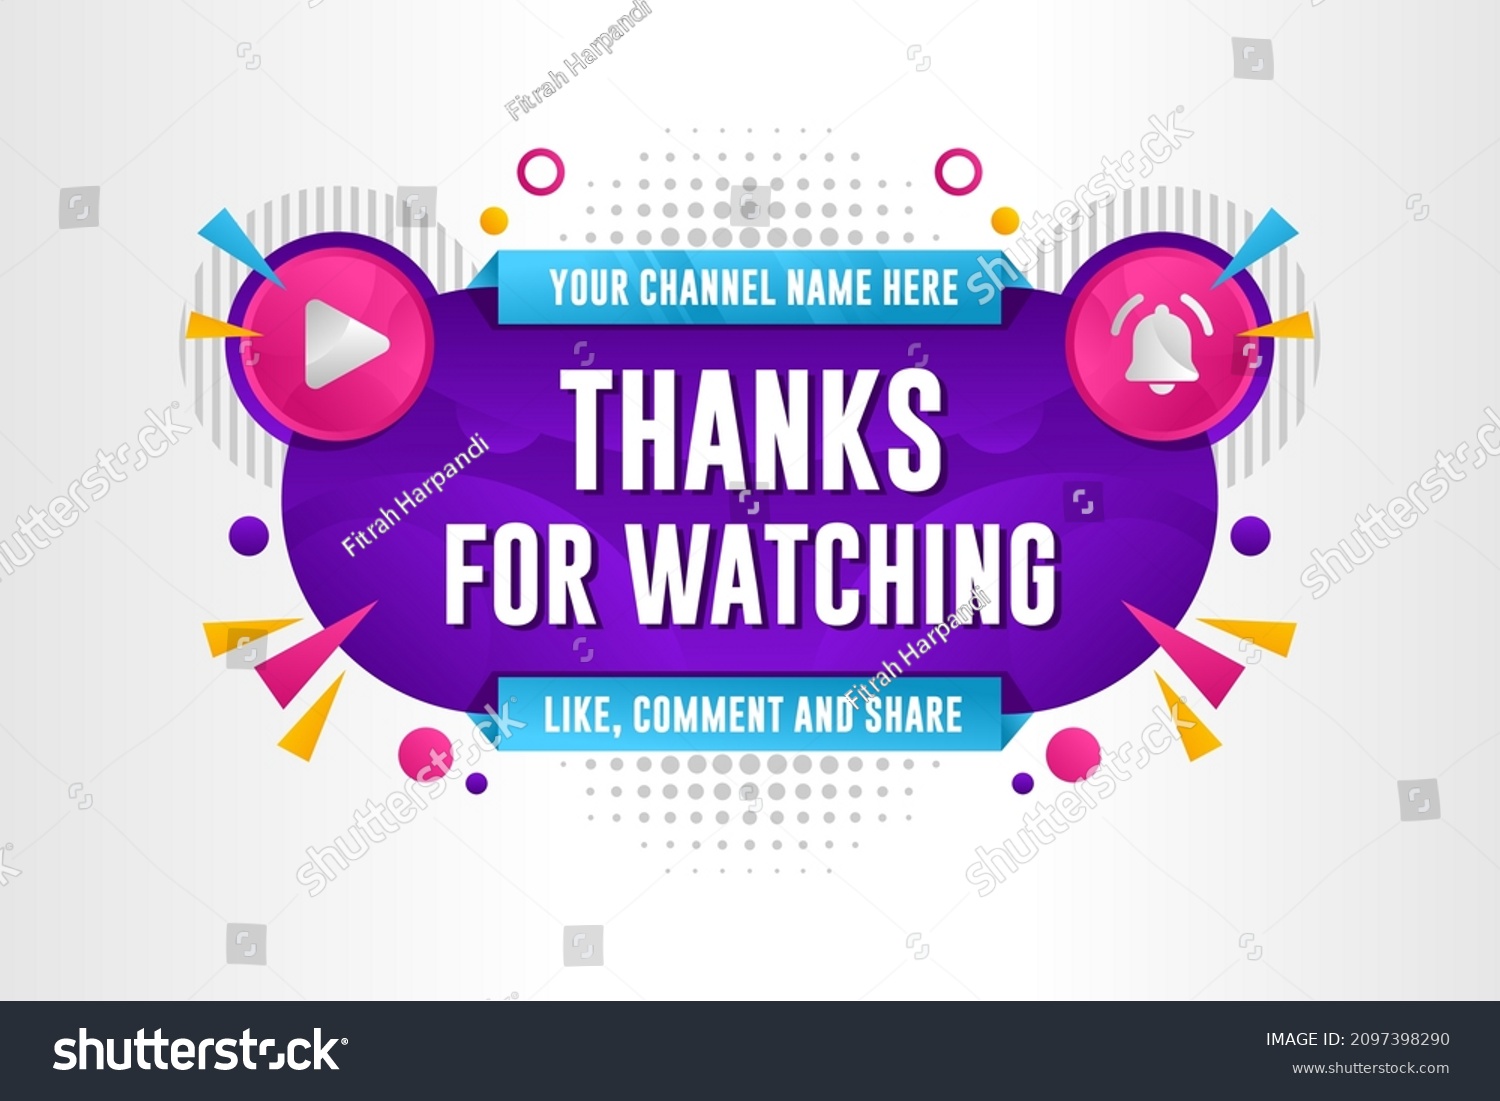 Thanks Wacthing Like Share Comment Banner Stock Vector (Royalty Free ...